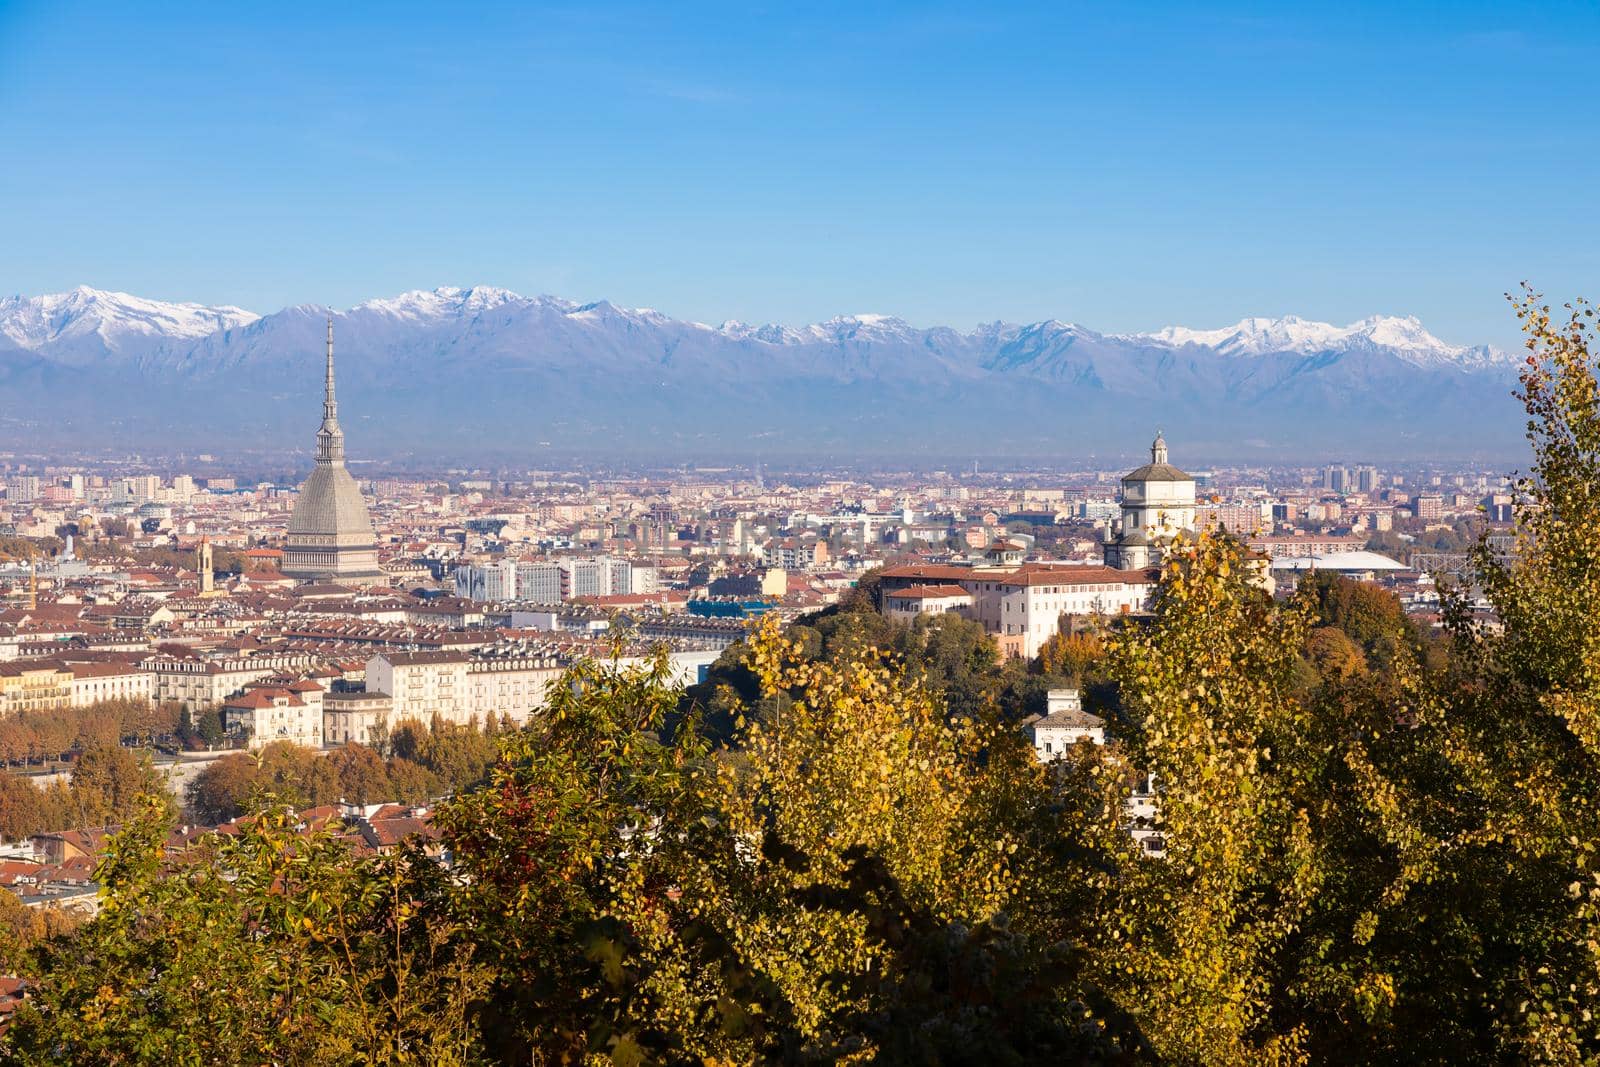 Turin panorama with Alps and Mole Antonelliana, Italy. Skyline of the symbol of Piedmont Region with Monte dei Cappuccini - Cappuccini's Hill. Sunrise light, Autumn by Perseomedusa